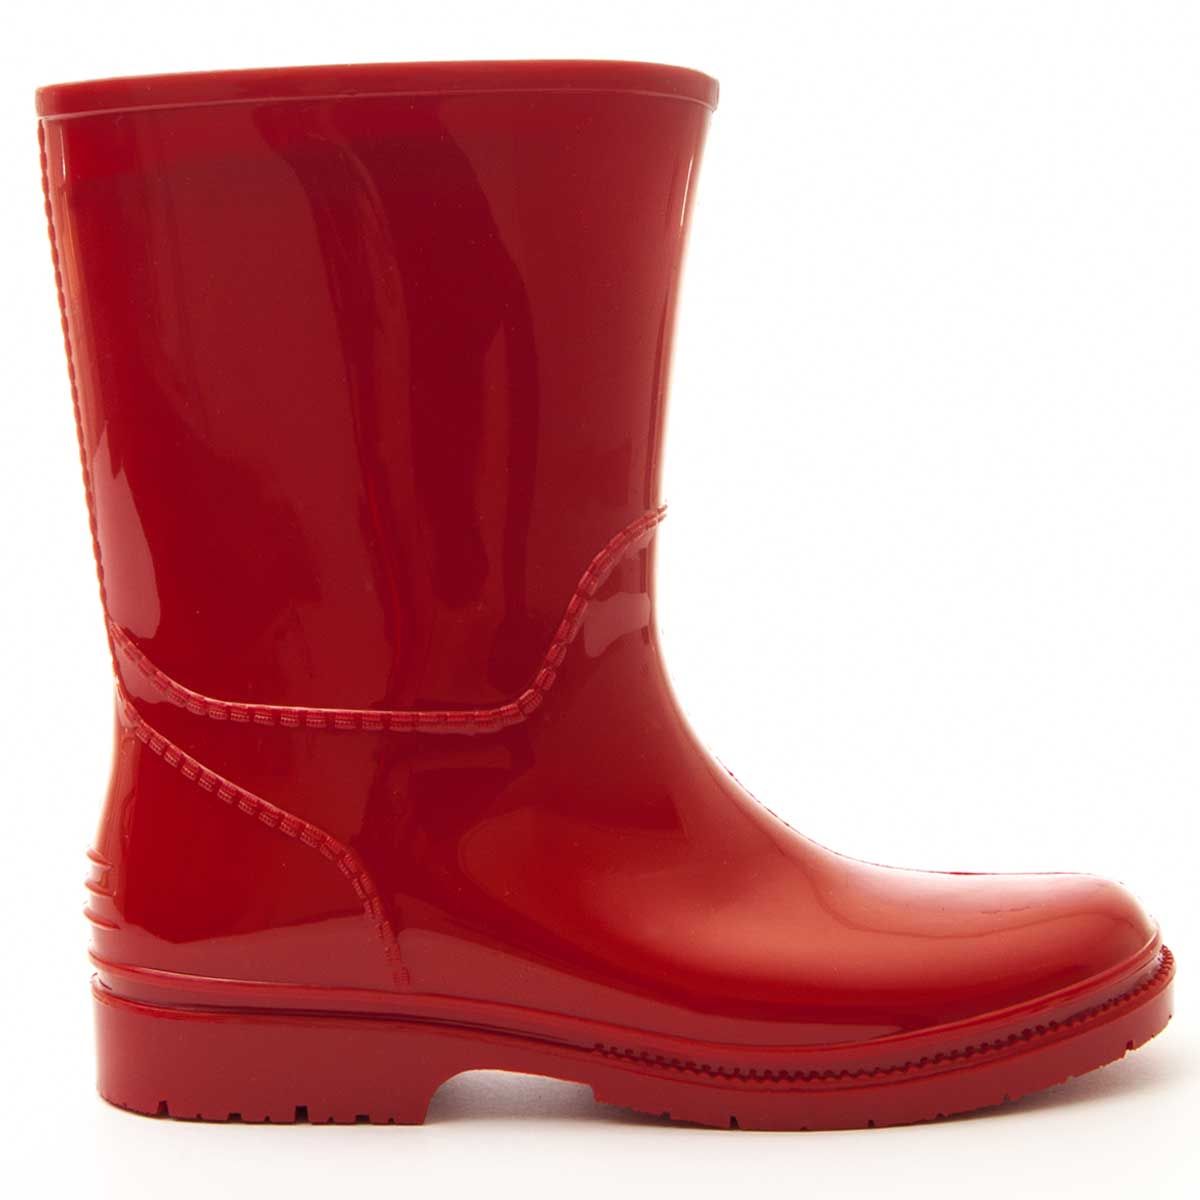 Capsula by Kelara collection. Average cane water boot with measures: 17cm * 13cm. Perfect for rainy days as it keeps the feet warm and dry. Both sole and outer lining are one piece so that water does not penetrate. Anti-slip rubber floor. Previous and later reinforcement for durability. Removable padded template.